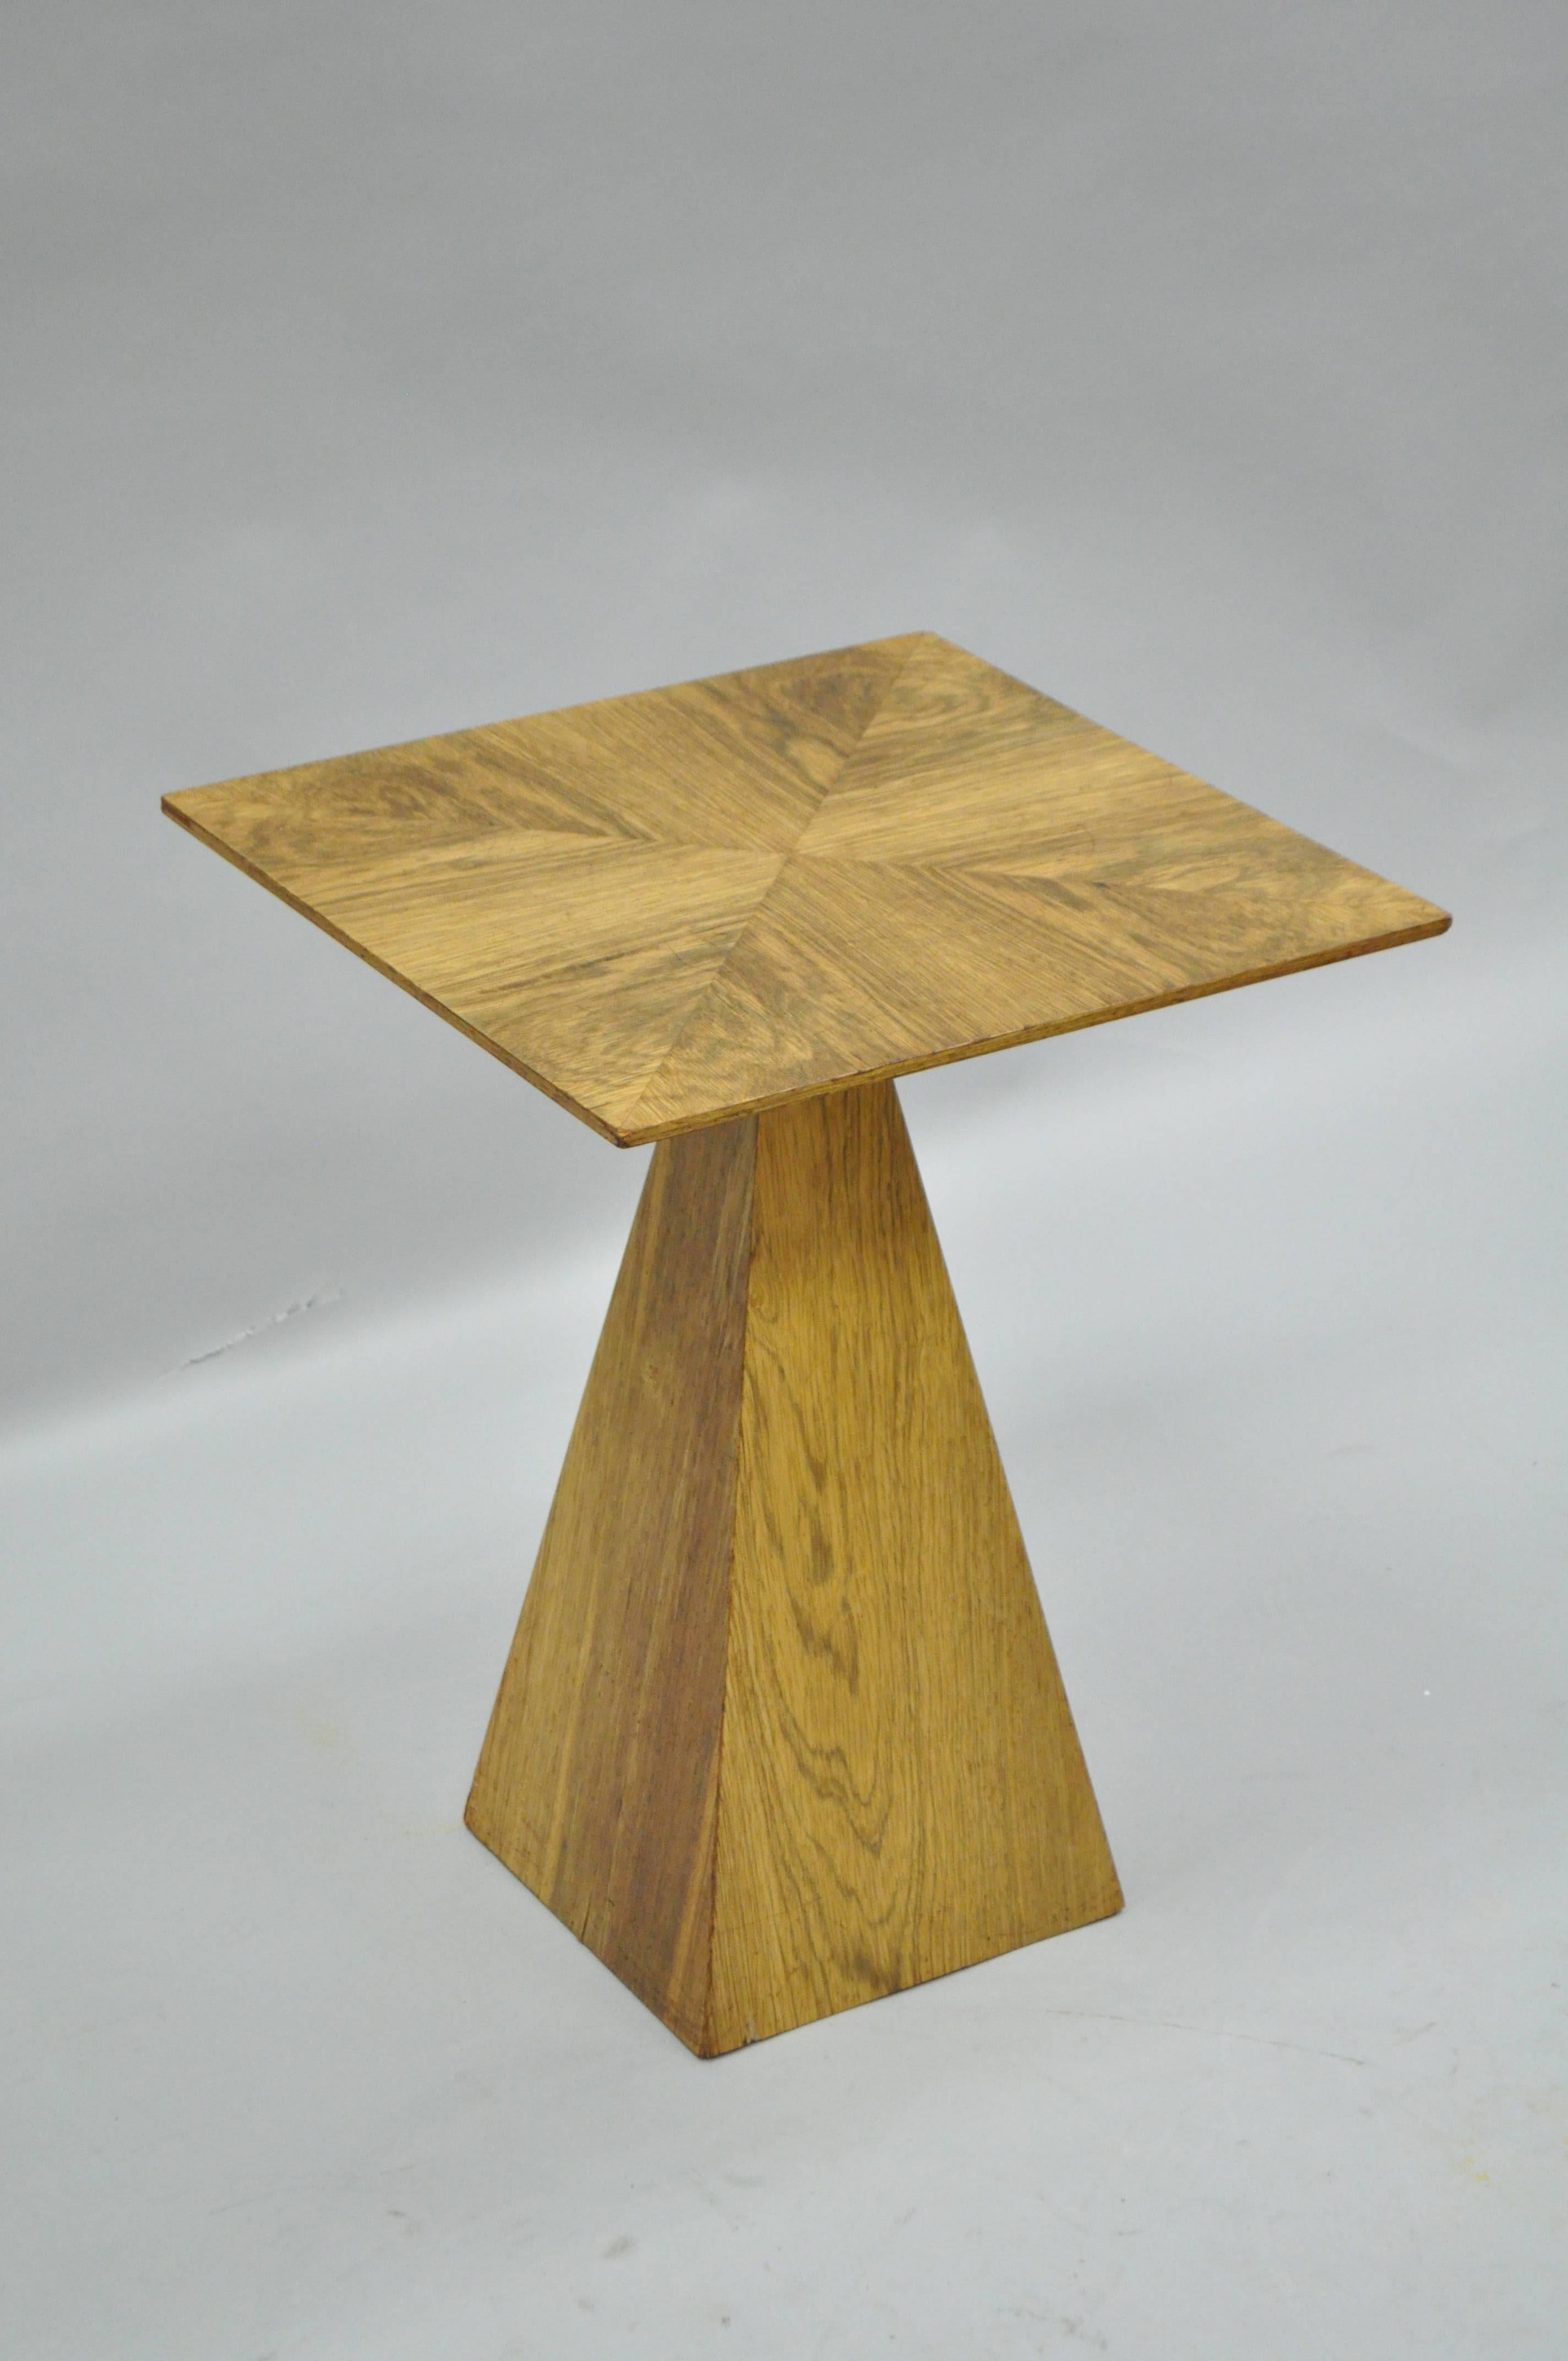 Vintage Harvey Probber Mid-Century Modern wenge wood pyramid end table. Item features a sculptural pyramid form, beautiful wood grain, clean modernist lines. Unmarked.